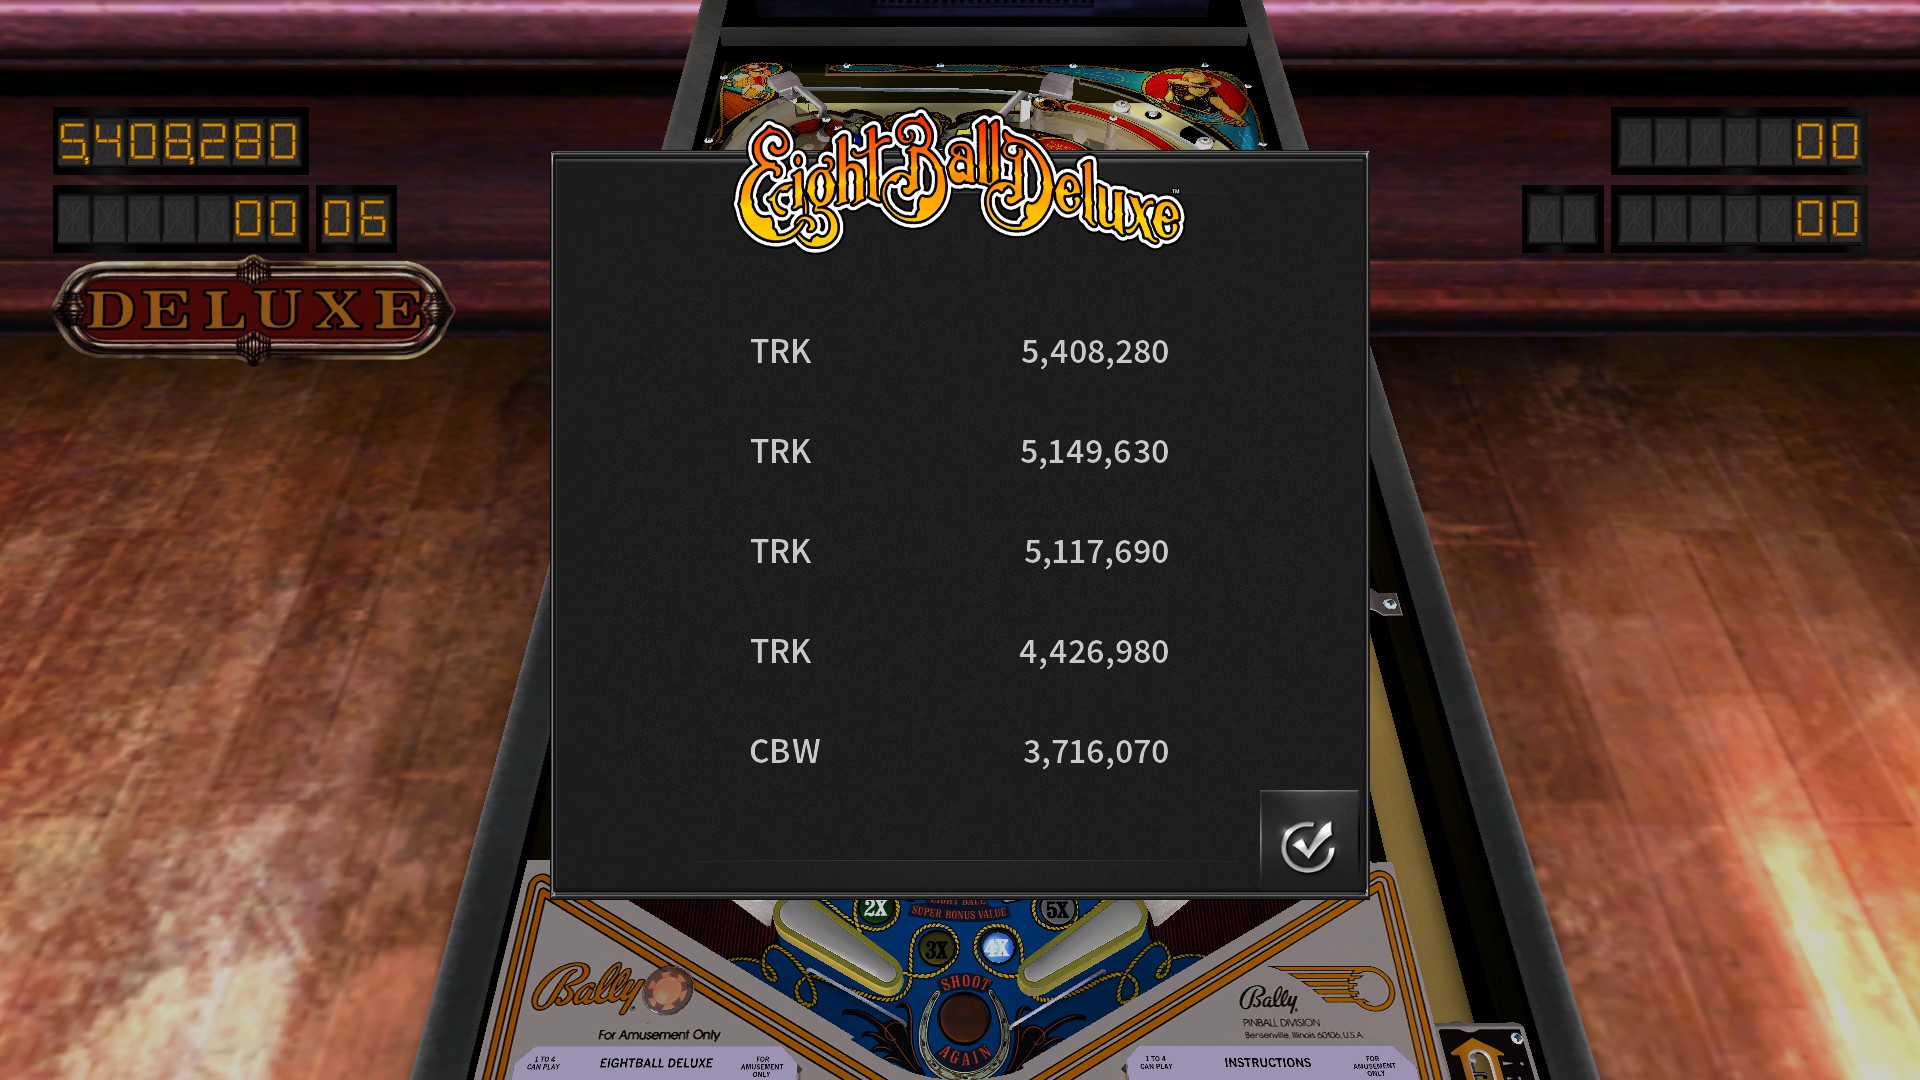 TheTrickster: Pinball Arcade: Eight Ball Deluxe (PC) 5,408,280 points on 2016-08-31 04:21:05